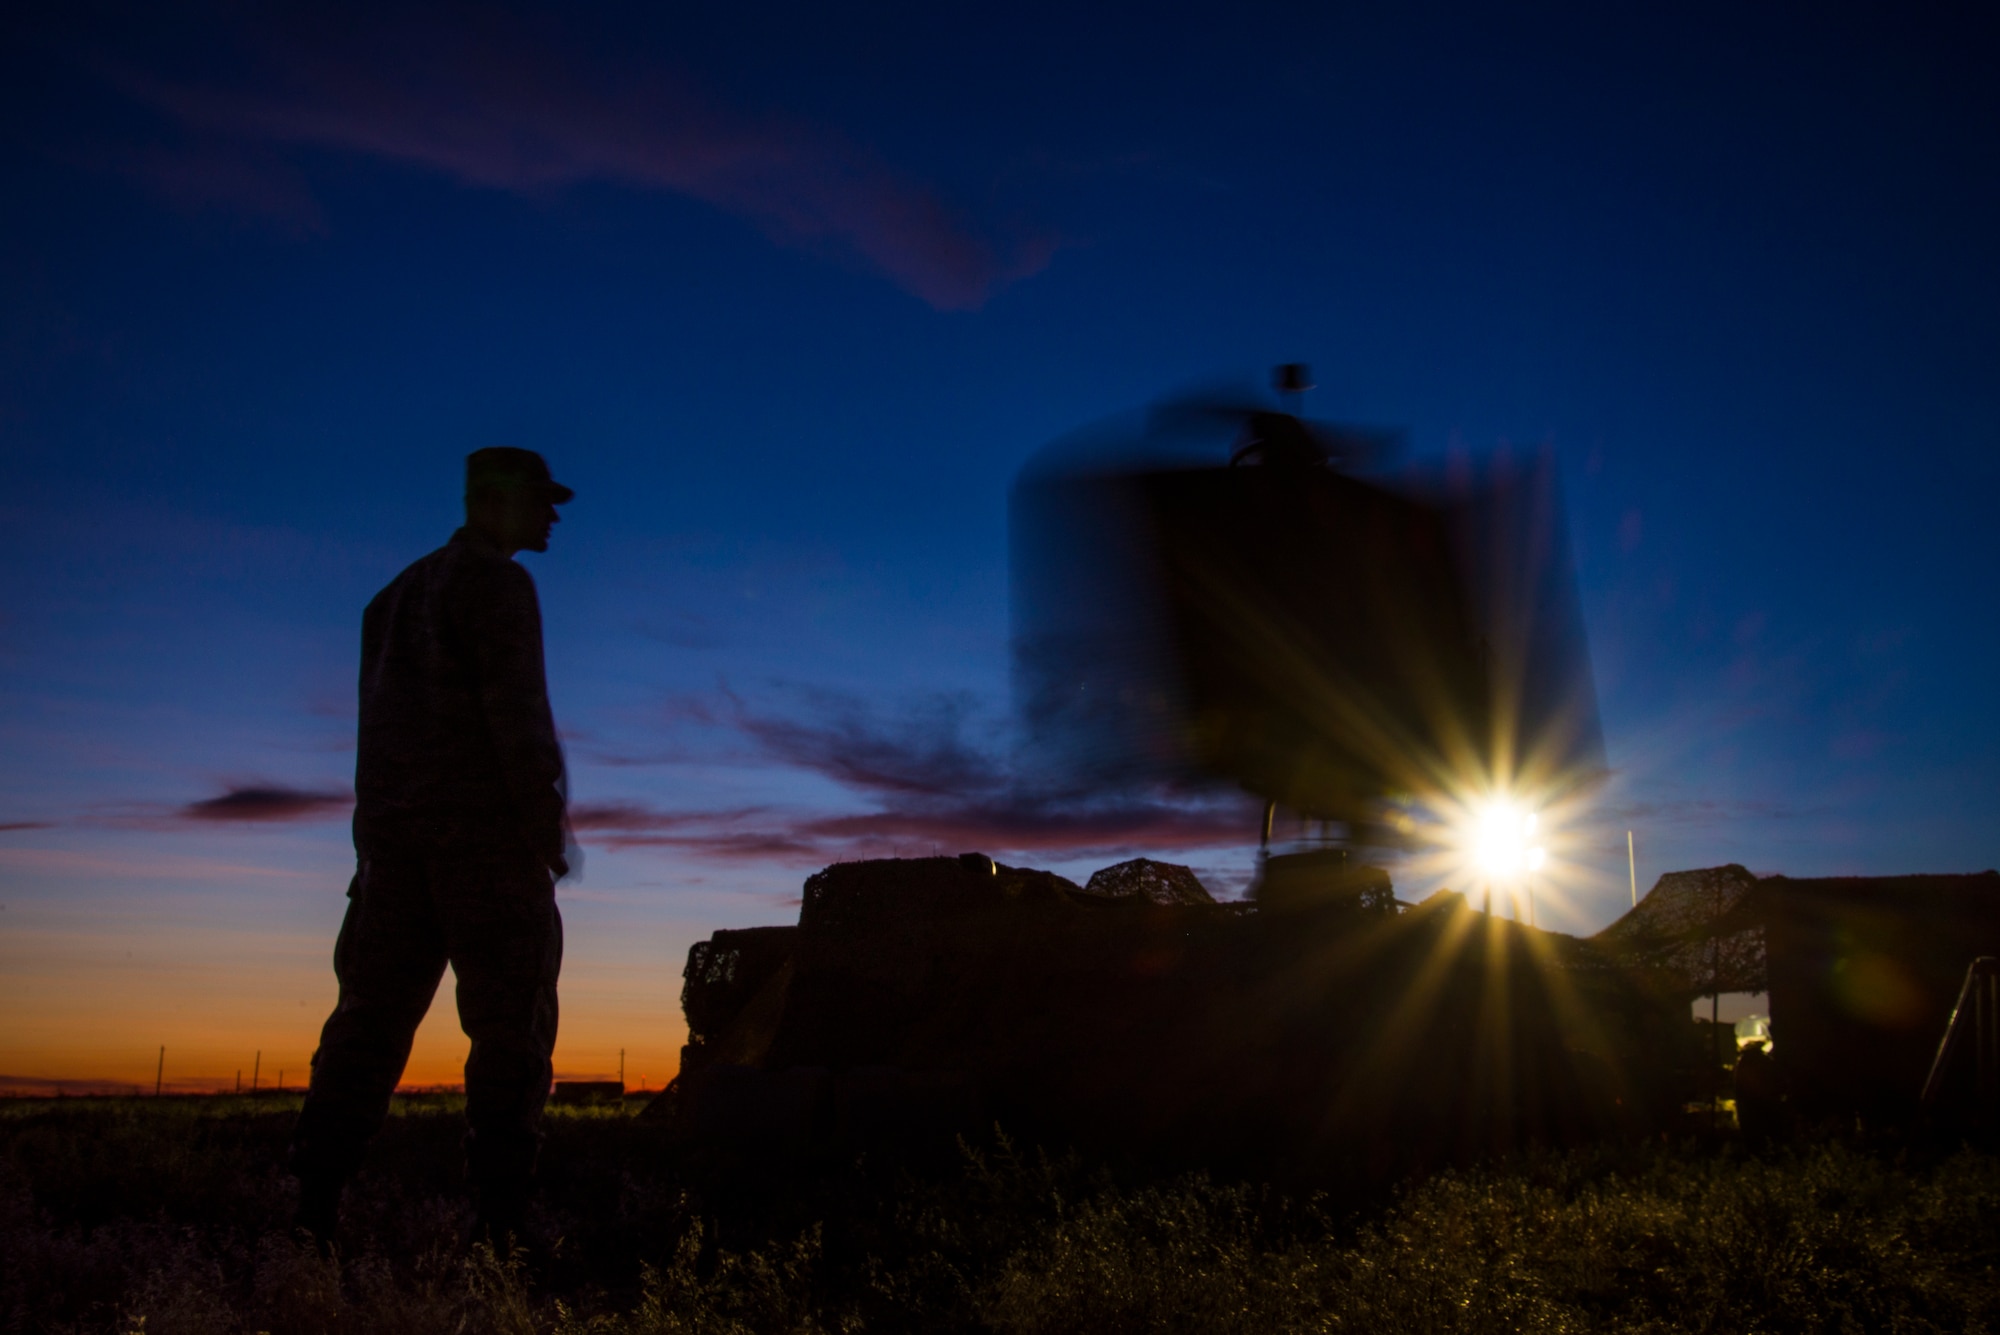 A U.S. Air Force Airman stands next to a TPS-75 radar system while it scans the skies during Hardrock Exercise 19-2, July 16, 2019, at Mountain Home Air Base, Idaho. The exercise was in a simulated deployed location where the base was built from the ground up and took control of the airspace. (U.S. Air Force photo by Airman 1st Class Andrew Kobialka)